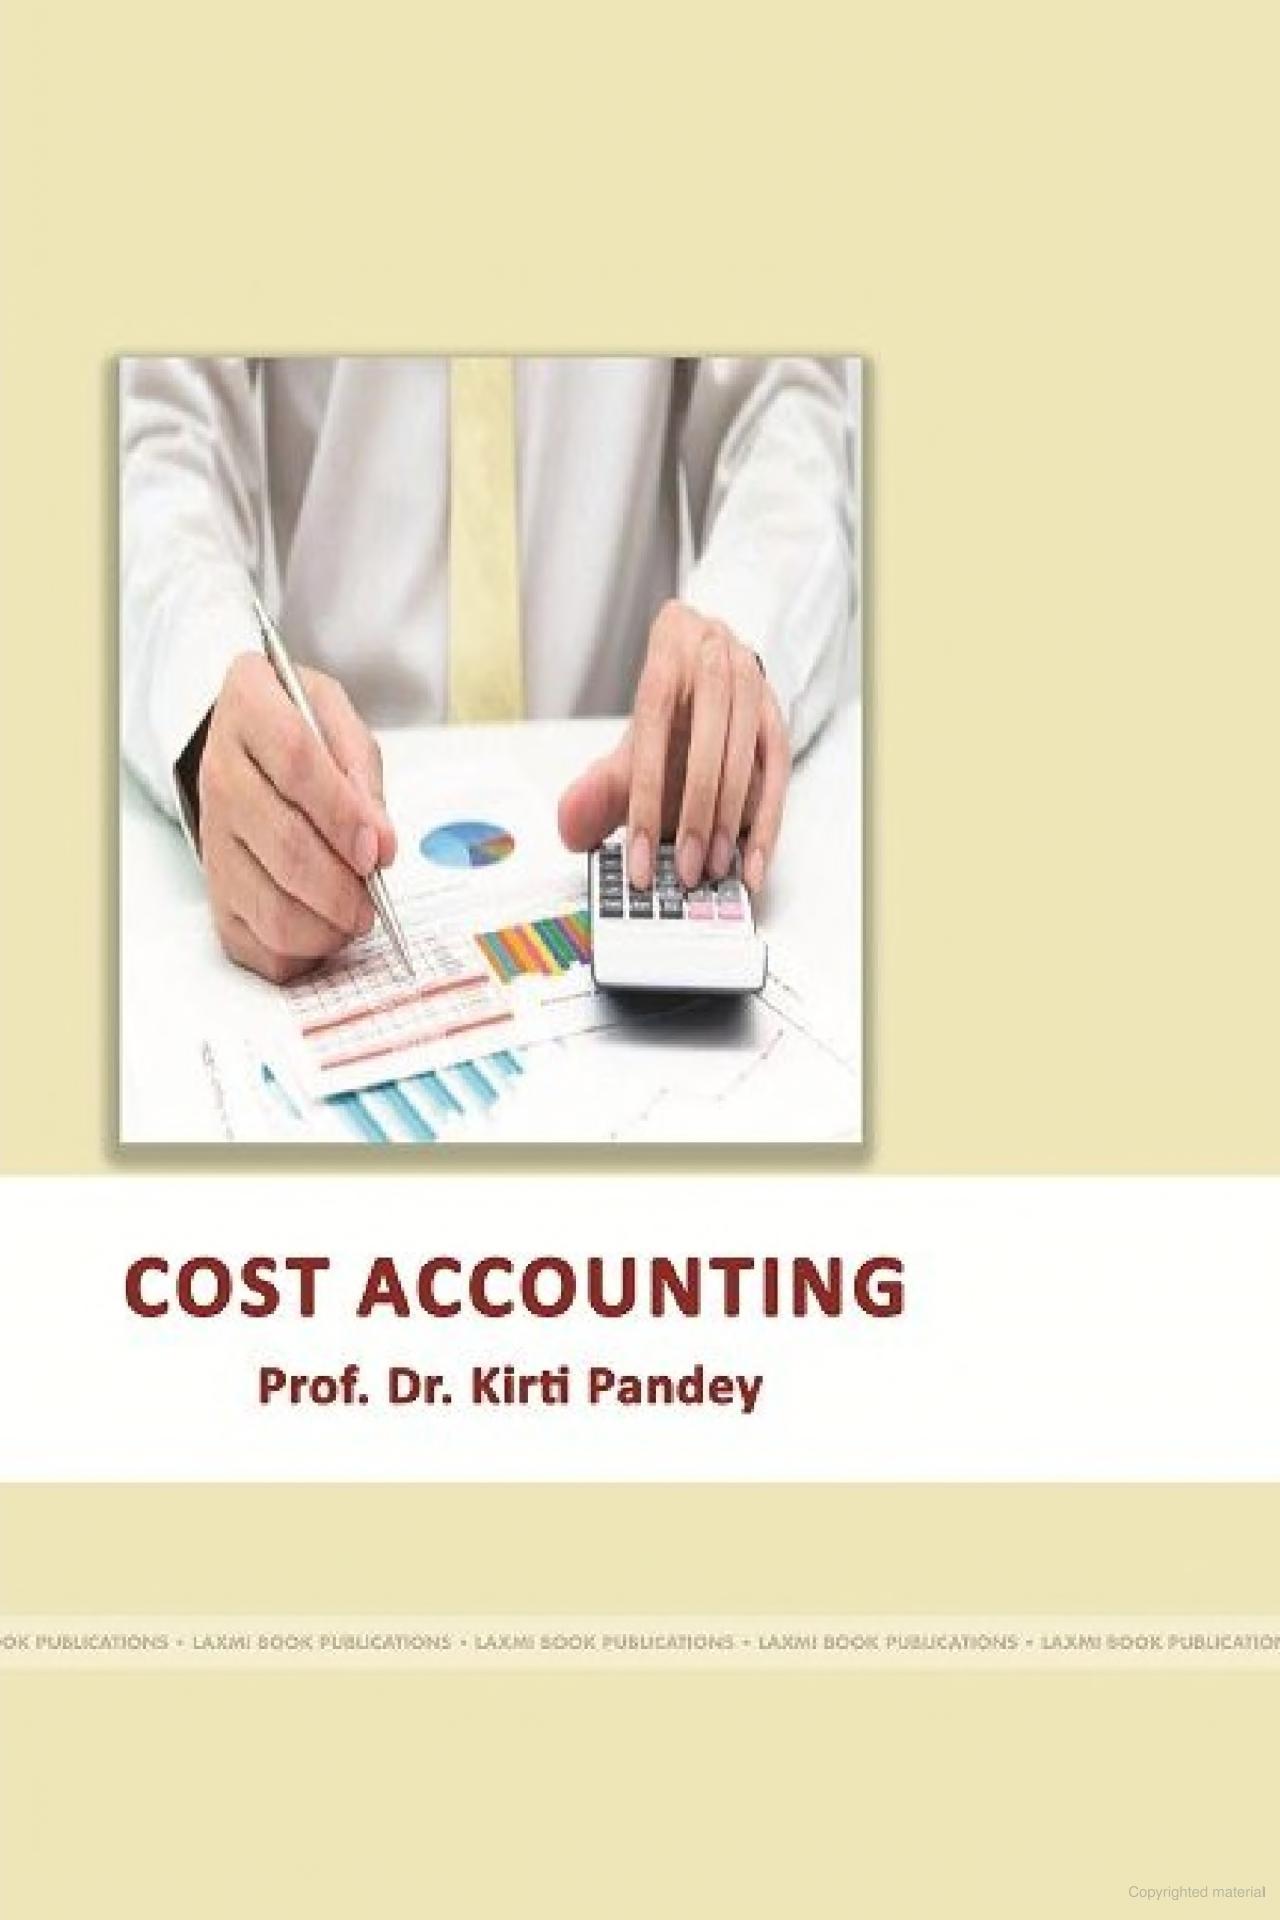 cost accounting 1st edition prof. dr. kirti pandey 1365671097, 9781365671098